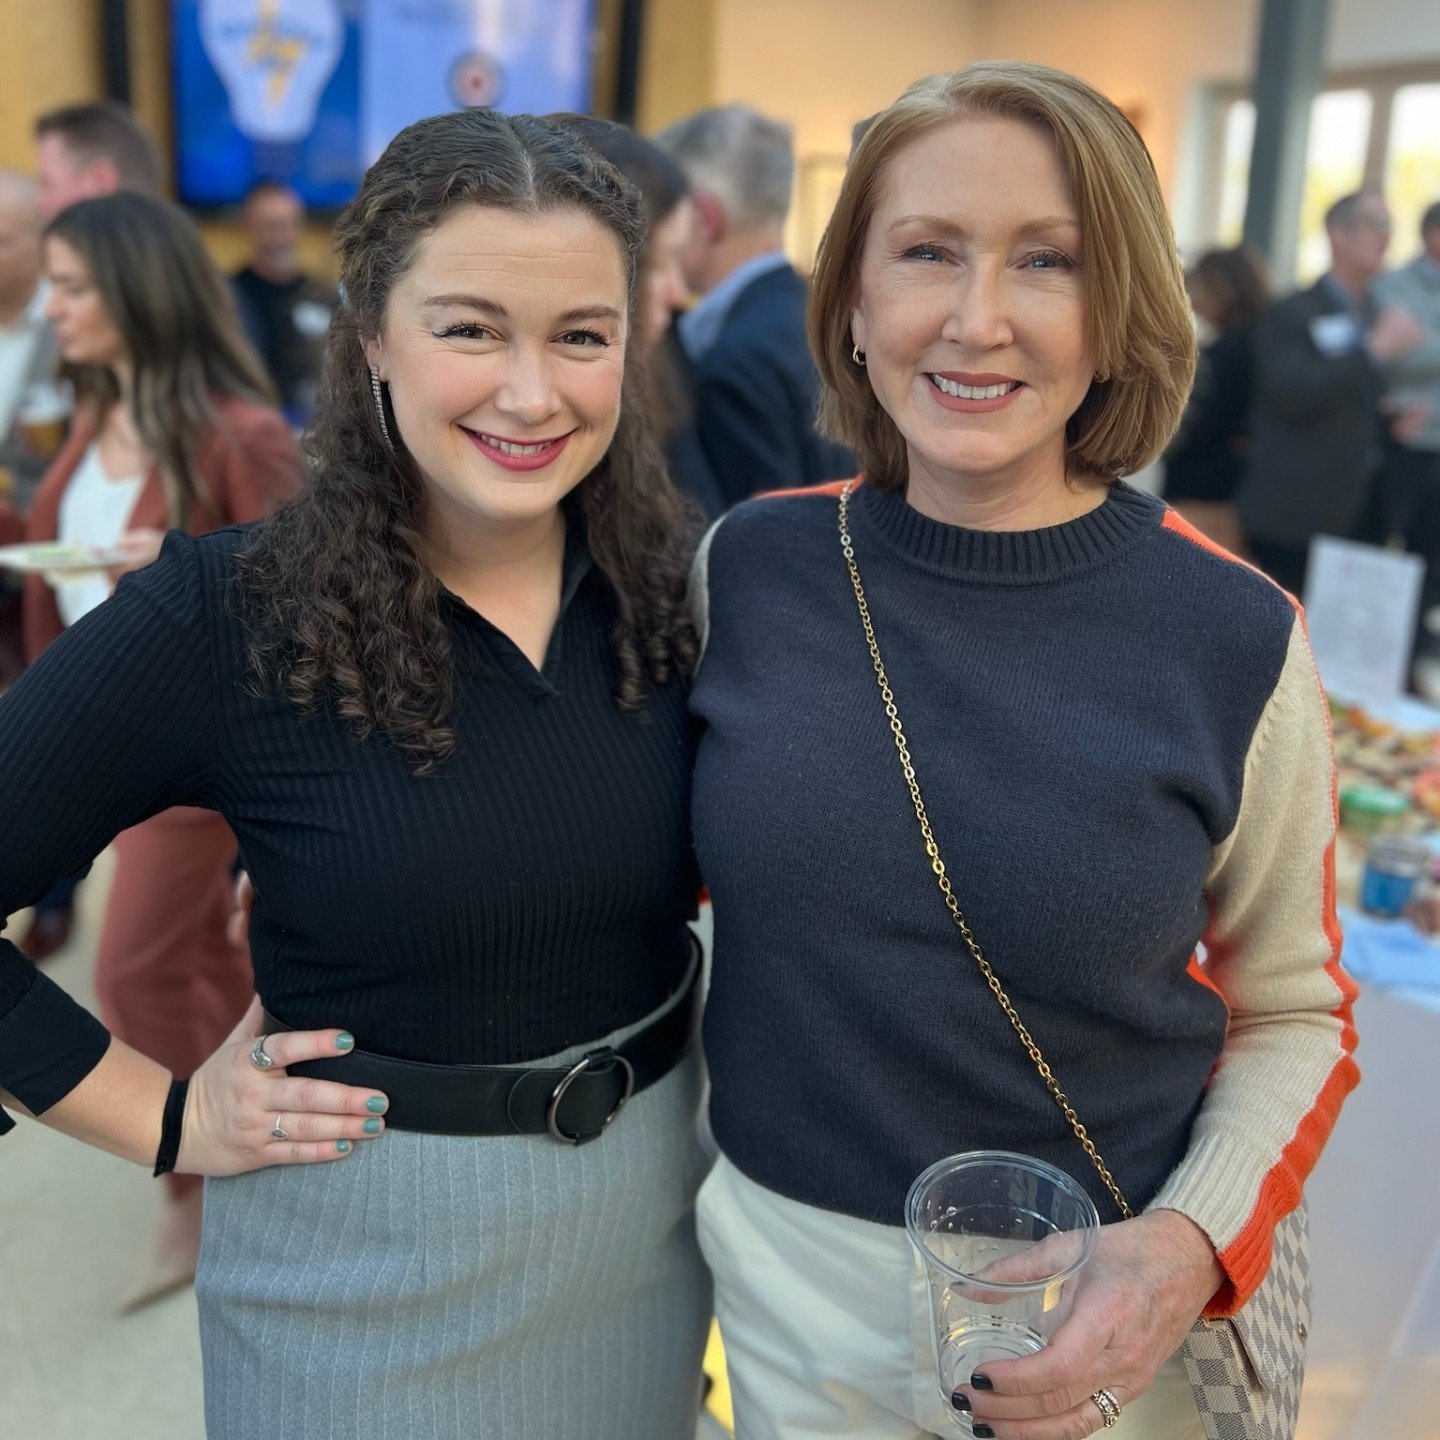 Team members, Tina and Rachel, attended and supported a client event last week - @bentechnepa's #VentureIdol.

The event celebrated innovation and offered inspiration and support to both emerging and established entrepreneurs. Congratulations to all 